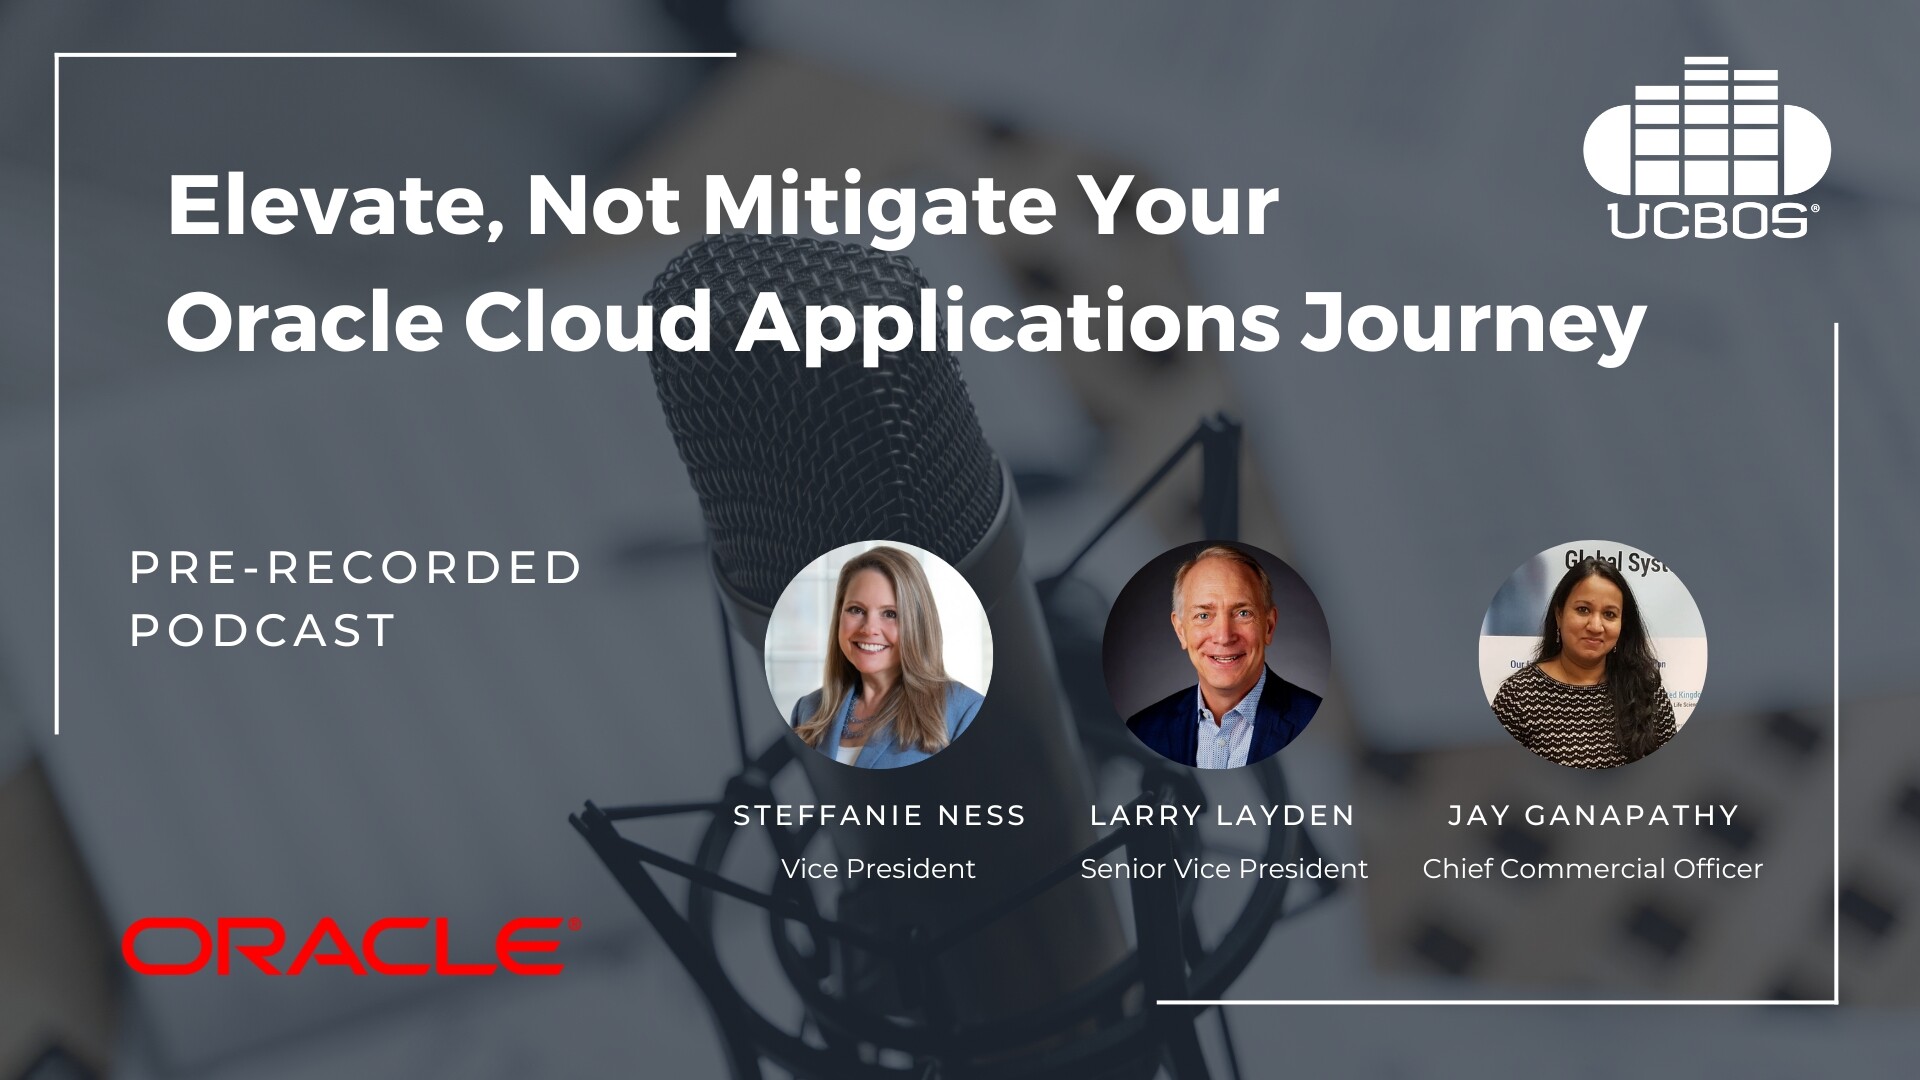 Elevate, Not Mitigate Your Oracle Cloud Applications Journey